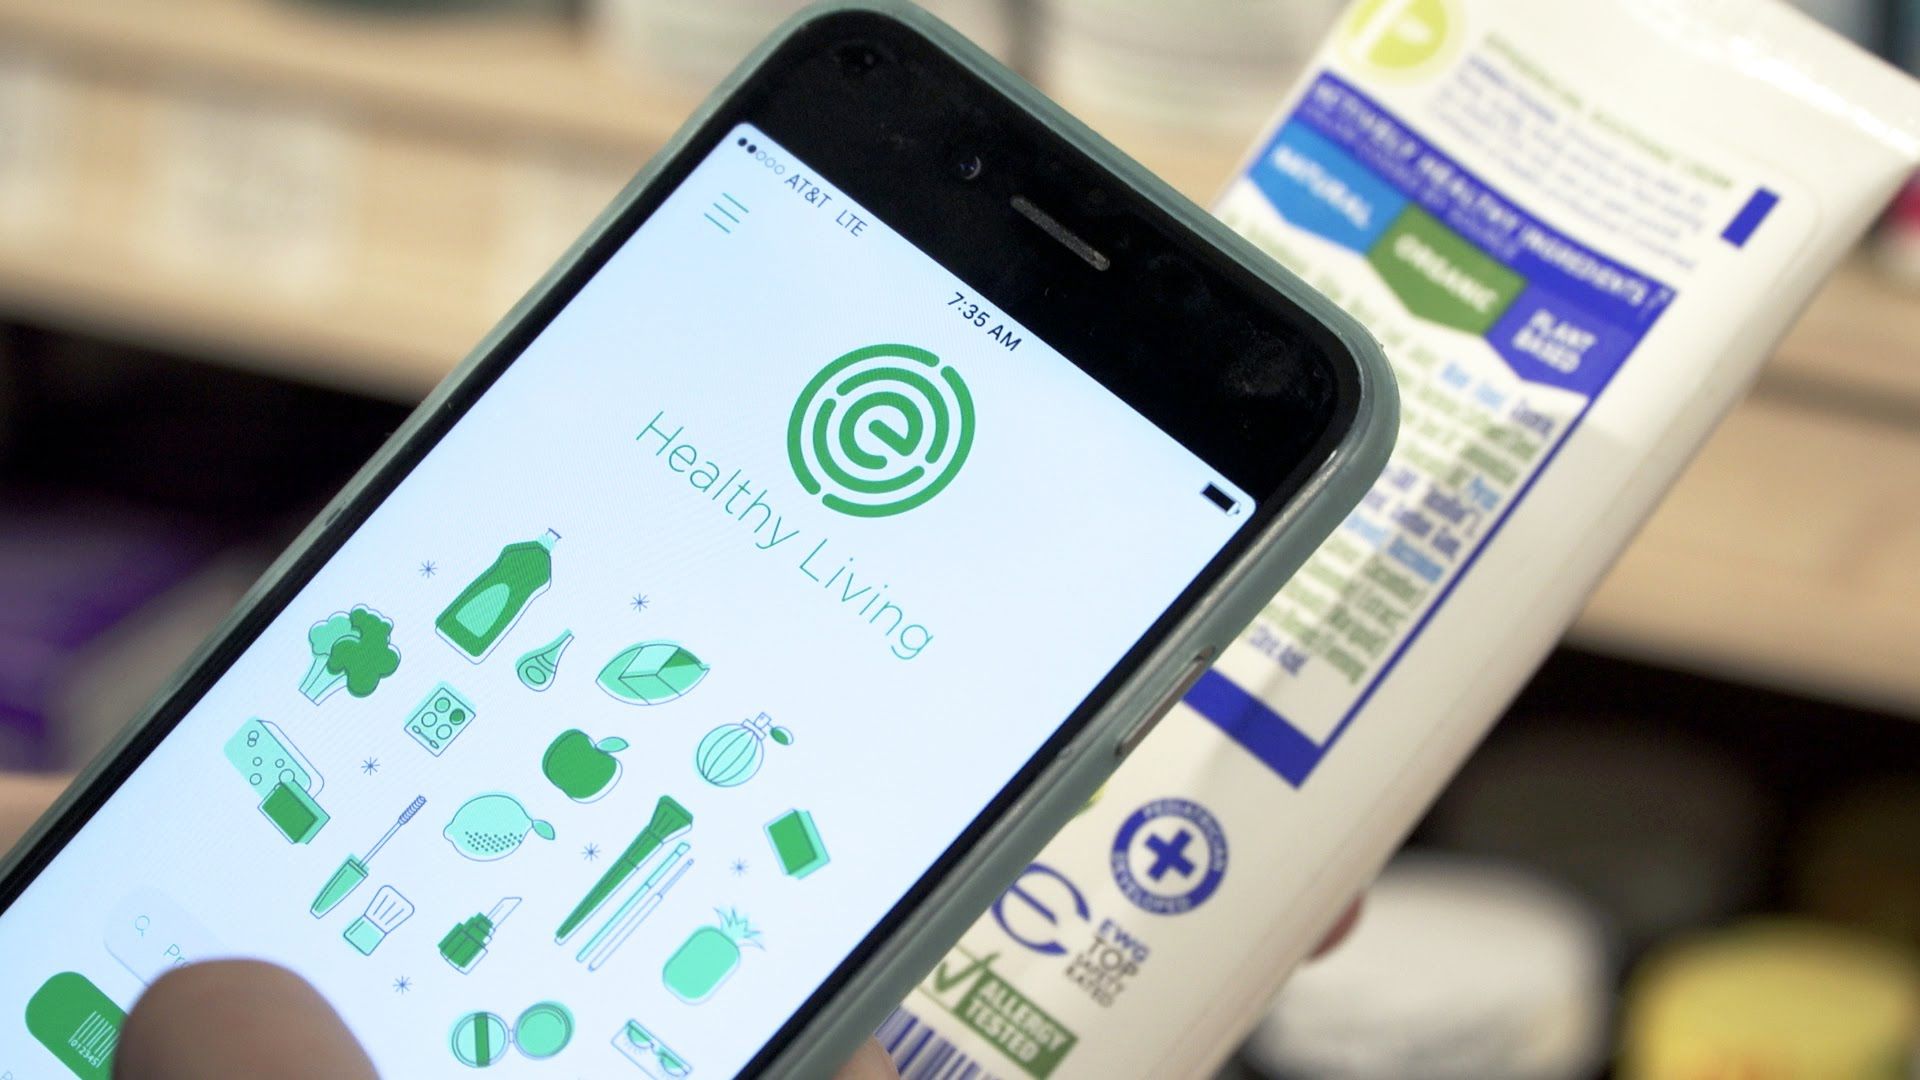 EWG Healthy Living app lets you review ingredients and product ratings right in the store by scanning the bar code